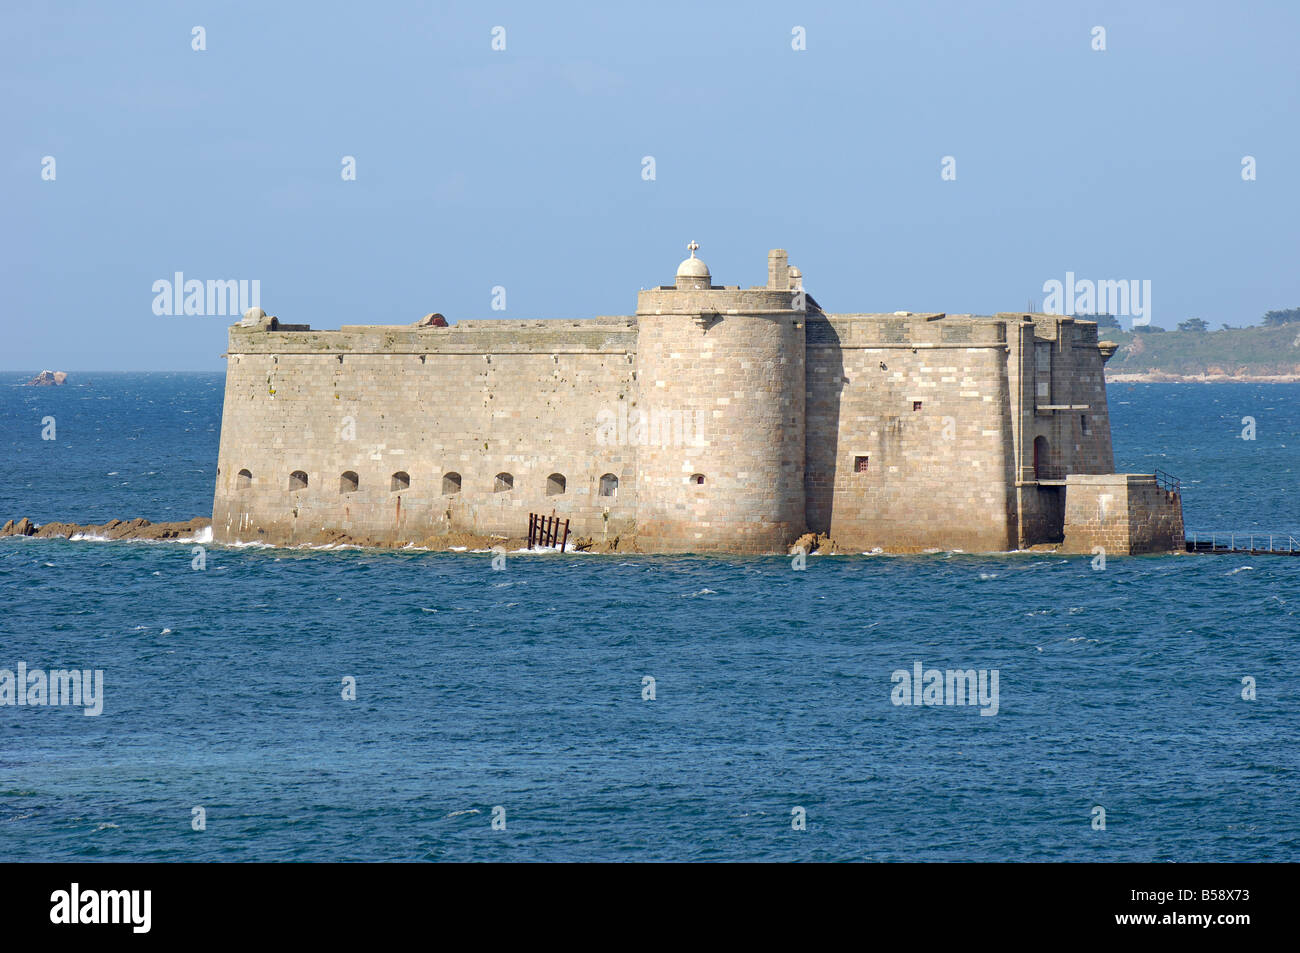 Taureau Castle, built by Vauban in the 17th century, Morlaix Bay, North Finistere, Brittany, France, Europe Stock Photo